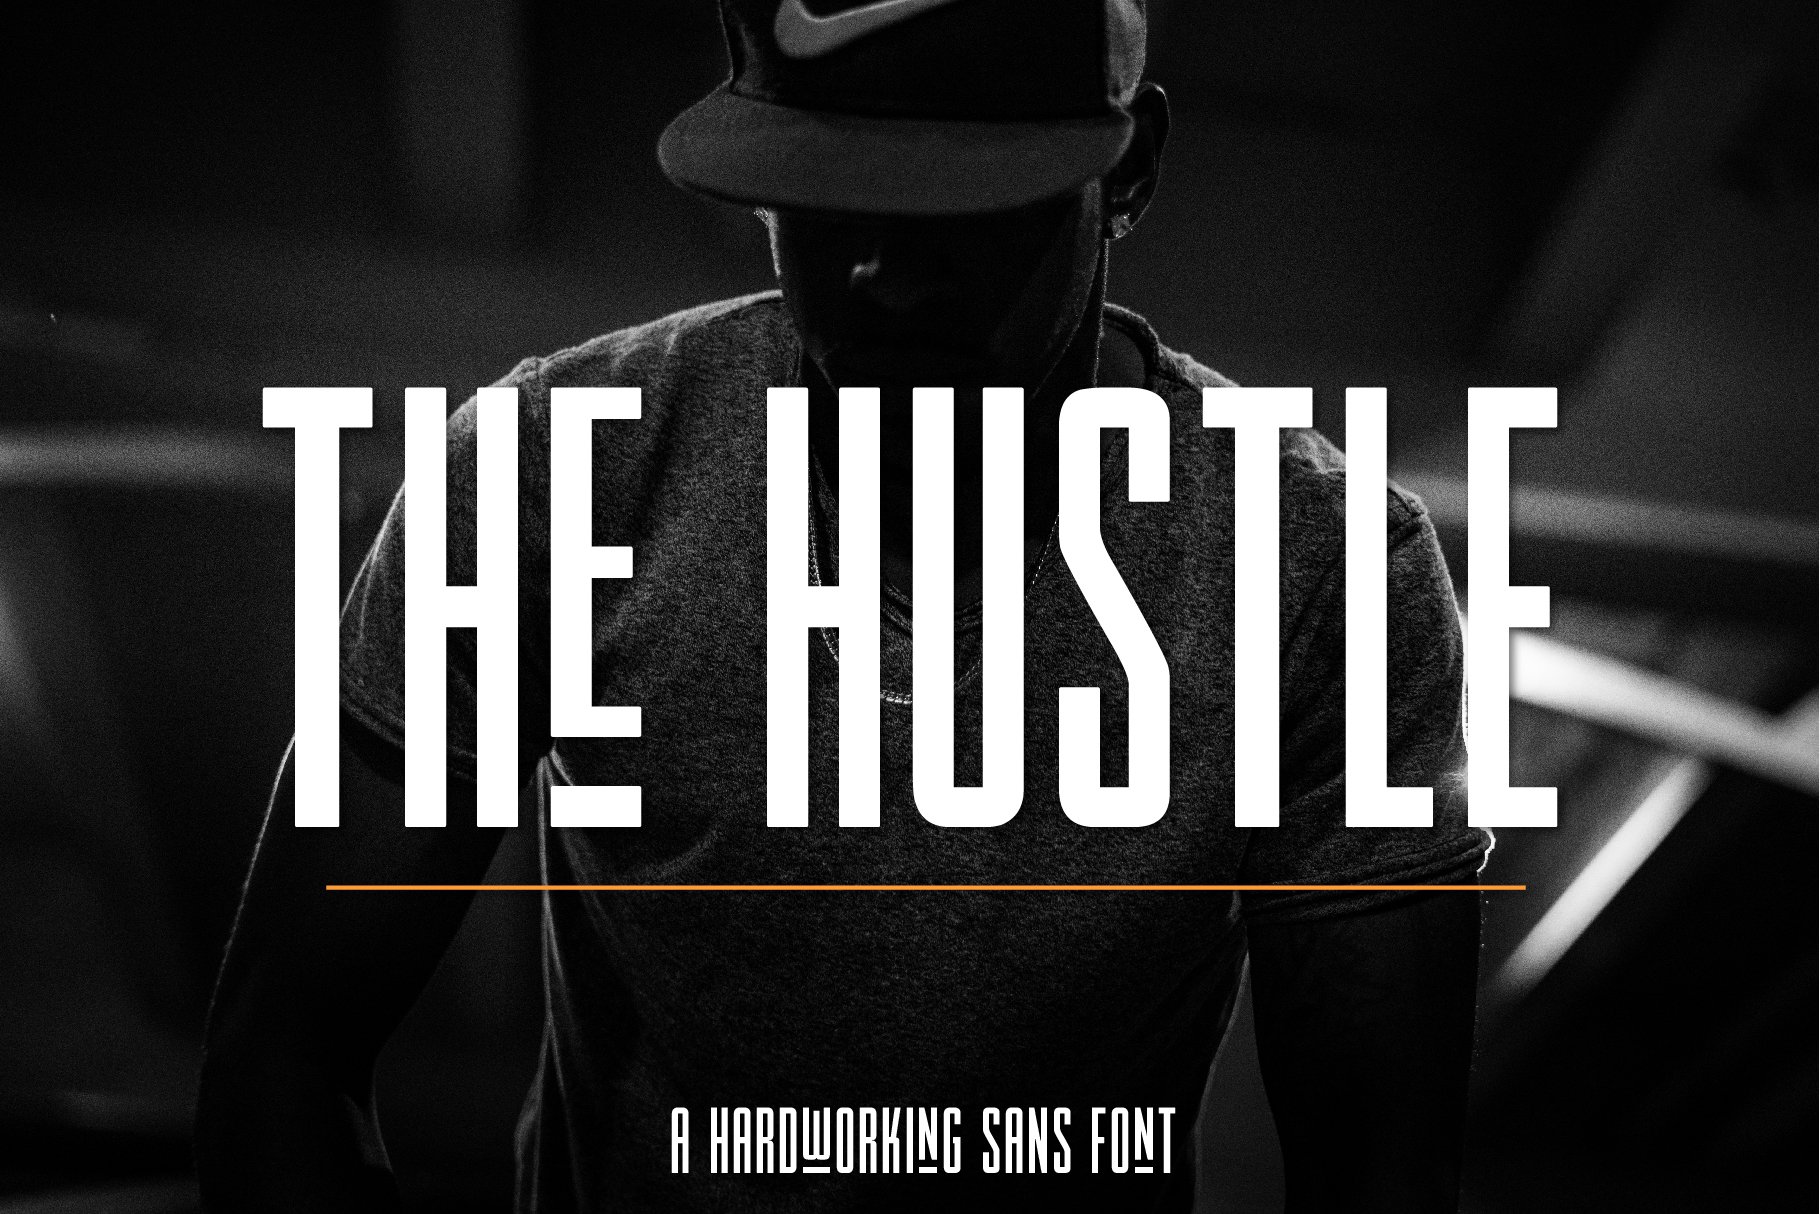 The Hustle Font cover image.